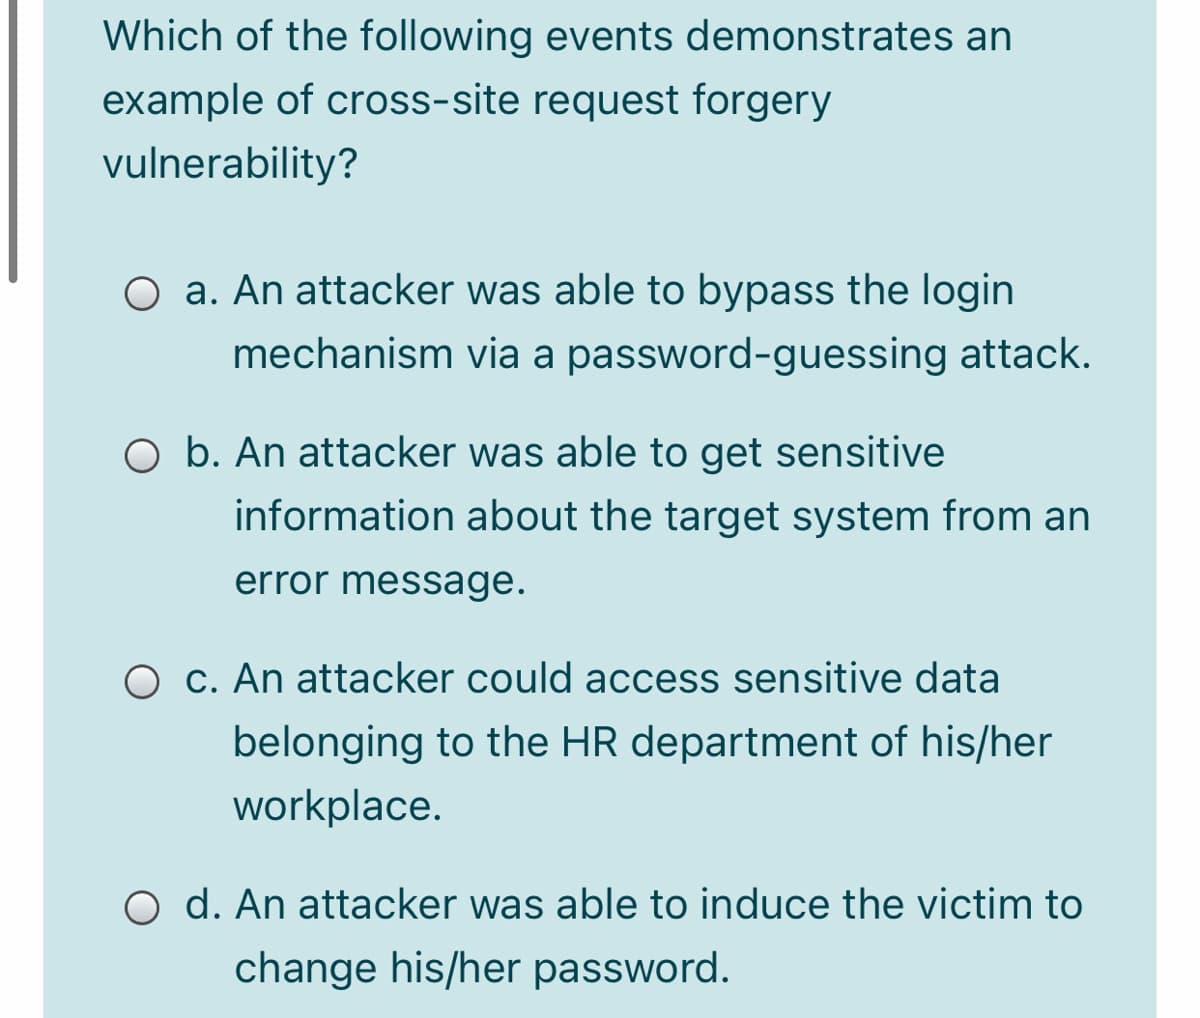 Which of the following events demonstrates an
example of cross-site request forgery
vulnerability?
O a. An attacker was able to bypass the login
mechanism via a password-guessing attack.
O b. An attacker was able to get sensitive
information about the target system from an
error message.
O C. An attacker could access sensitive data
belonging to the HR department of his/her
workplace.
O d. An attacker was able to induce the victim to
change his/her password.
